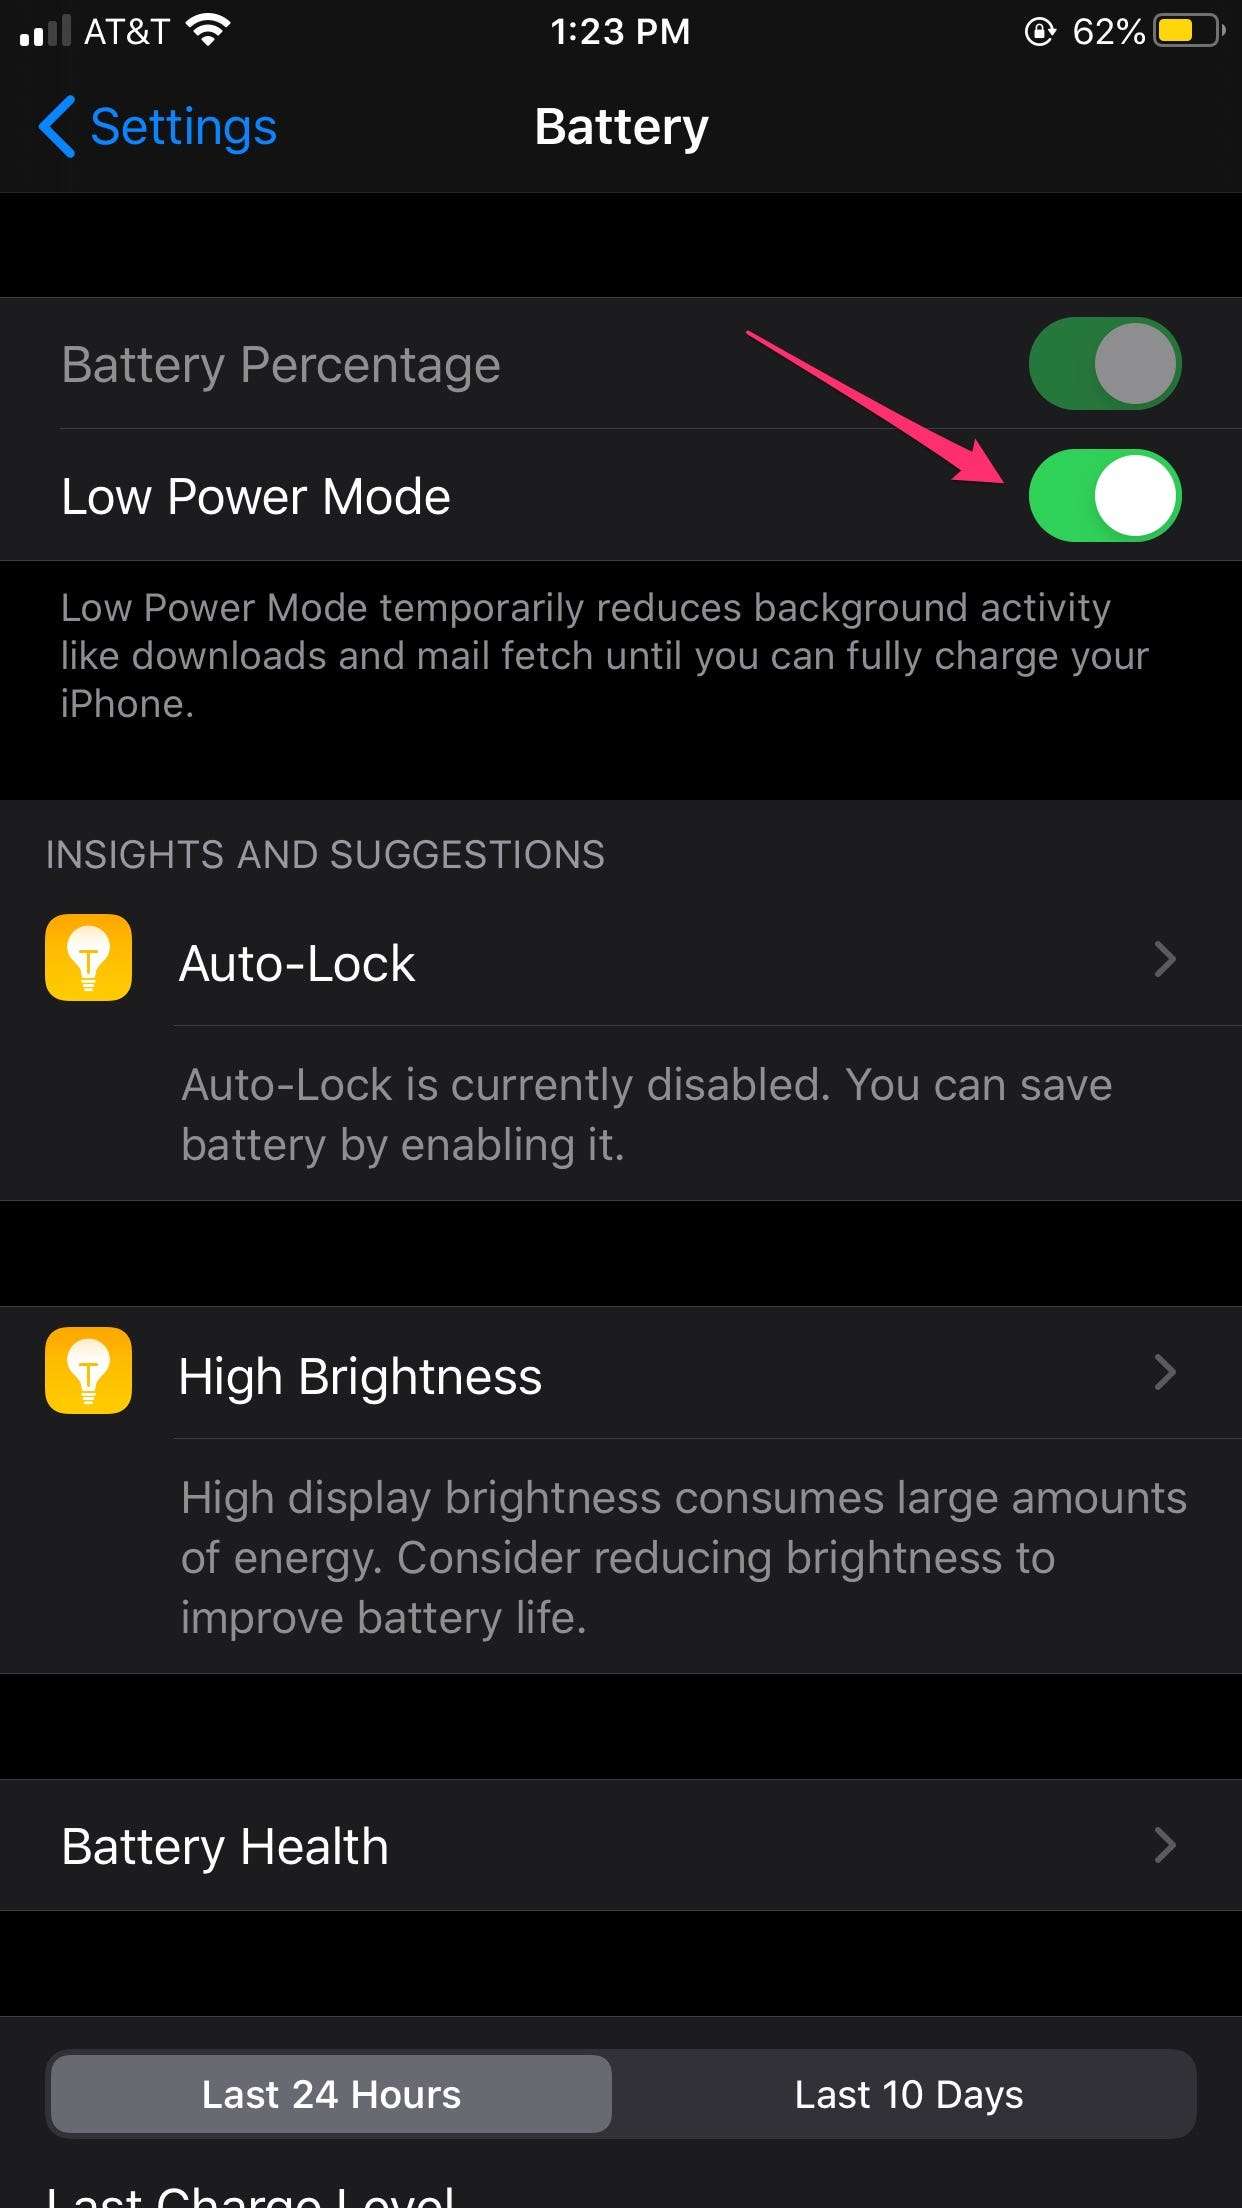 does low battery mode kill your phone faster